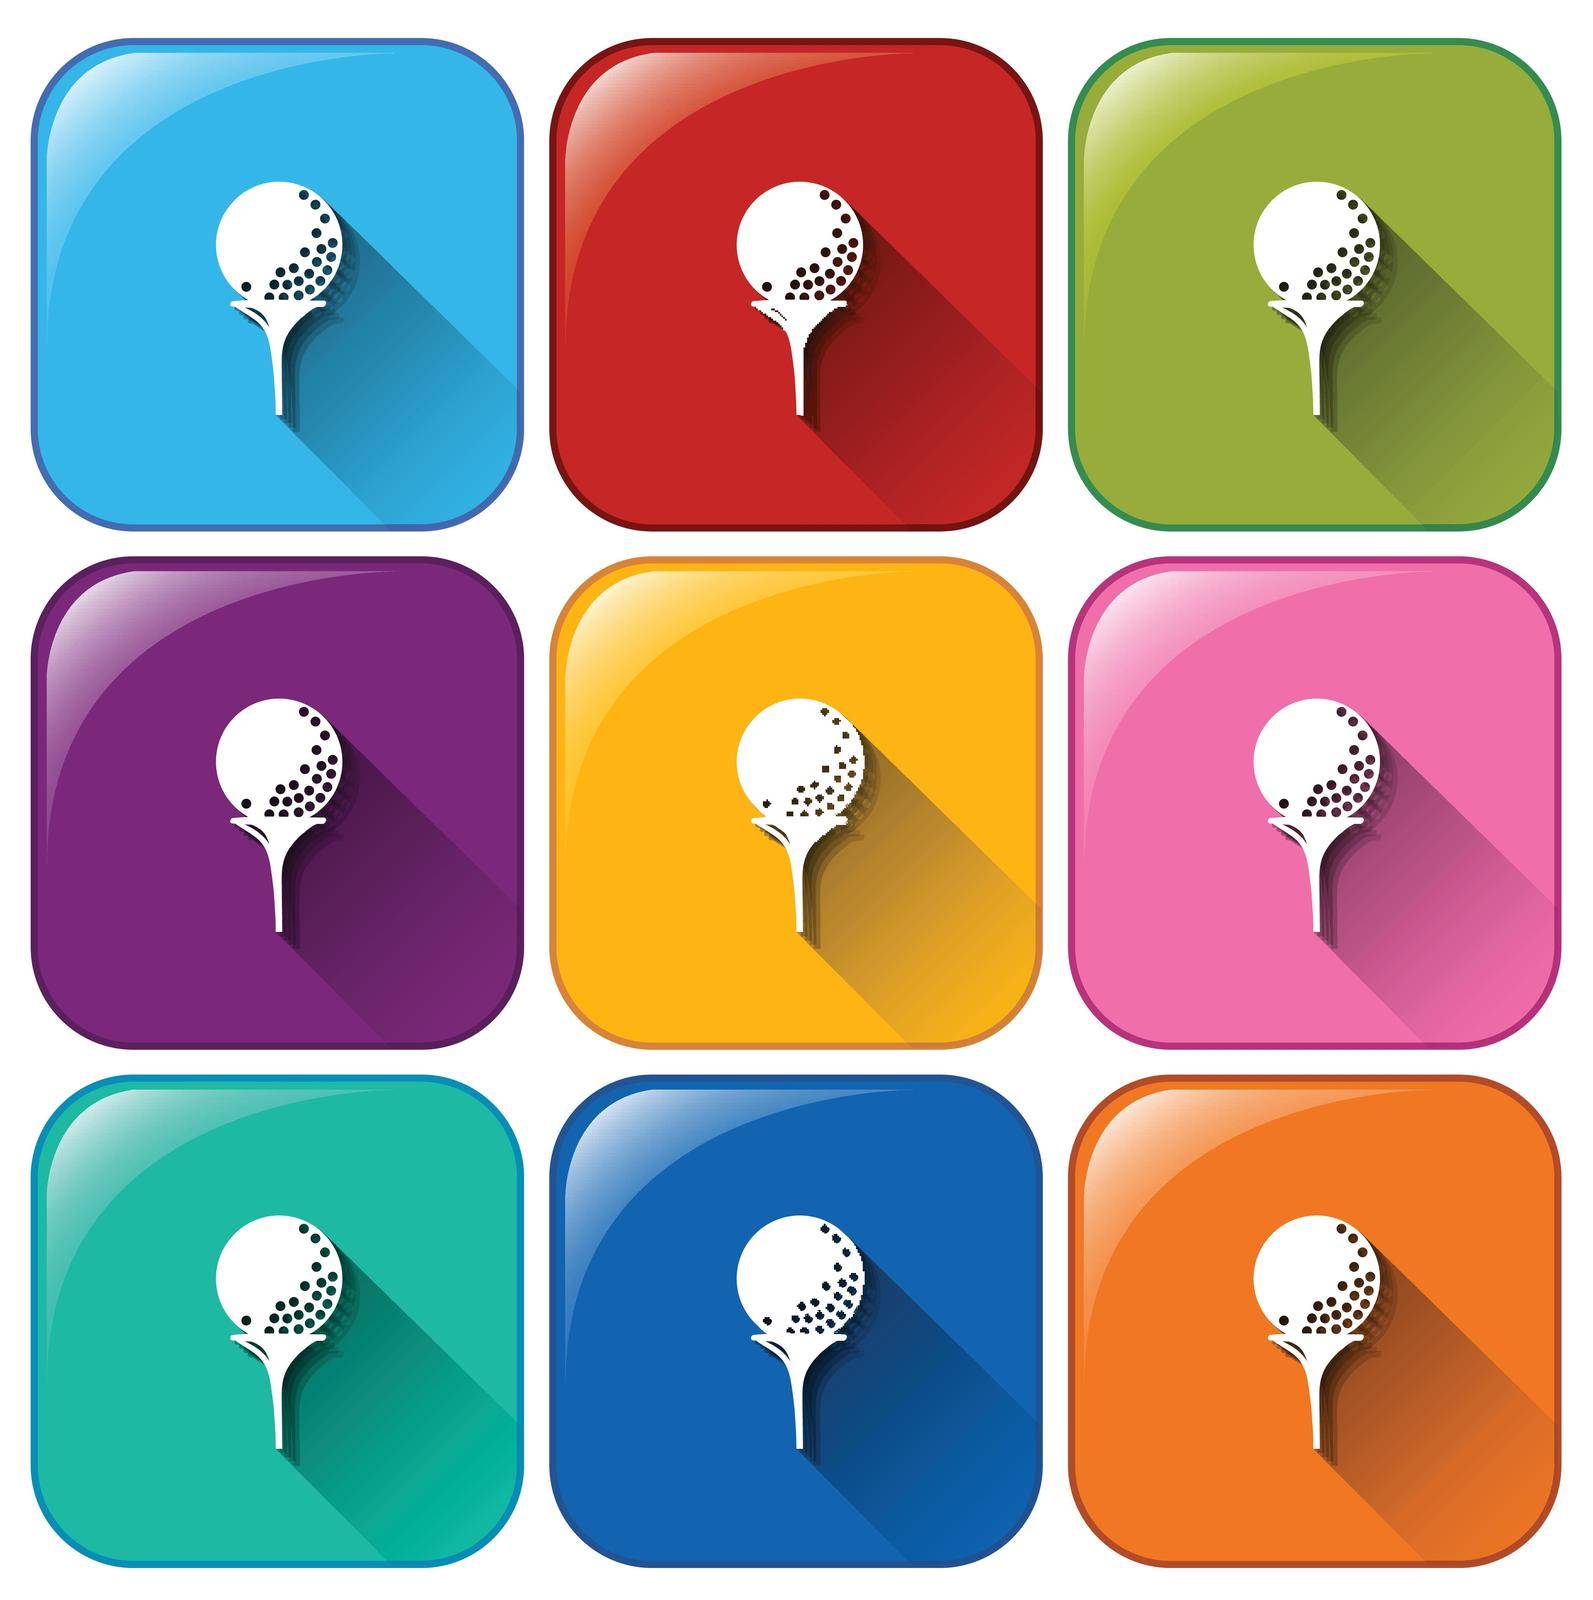 Illustration of the rounded icons with golf balls on a white background